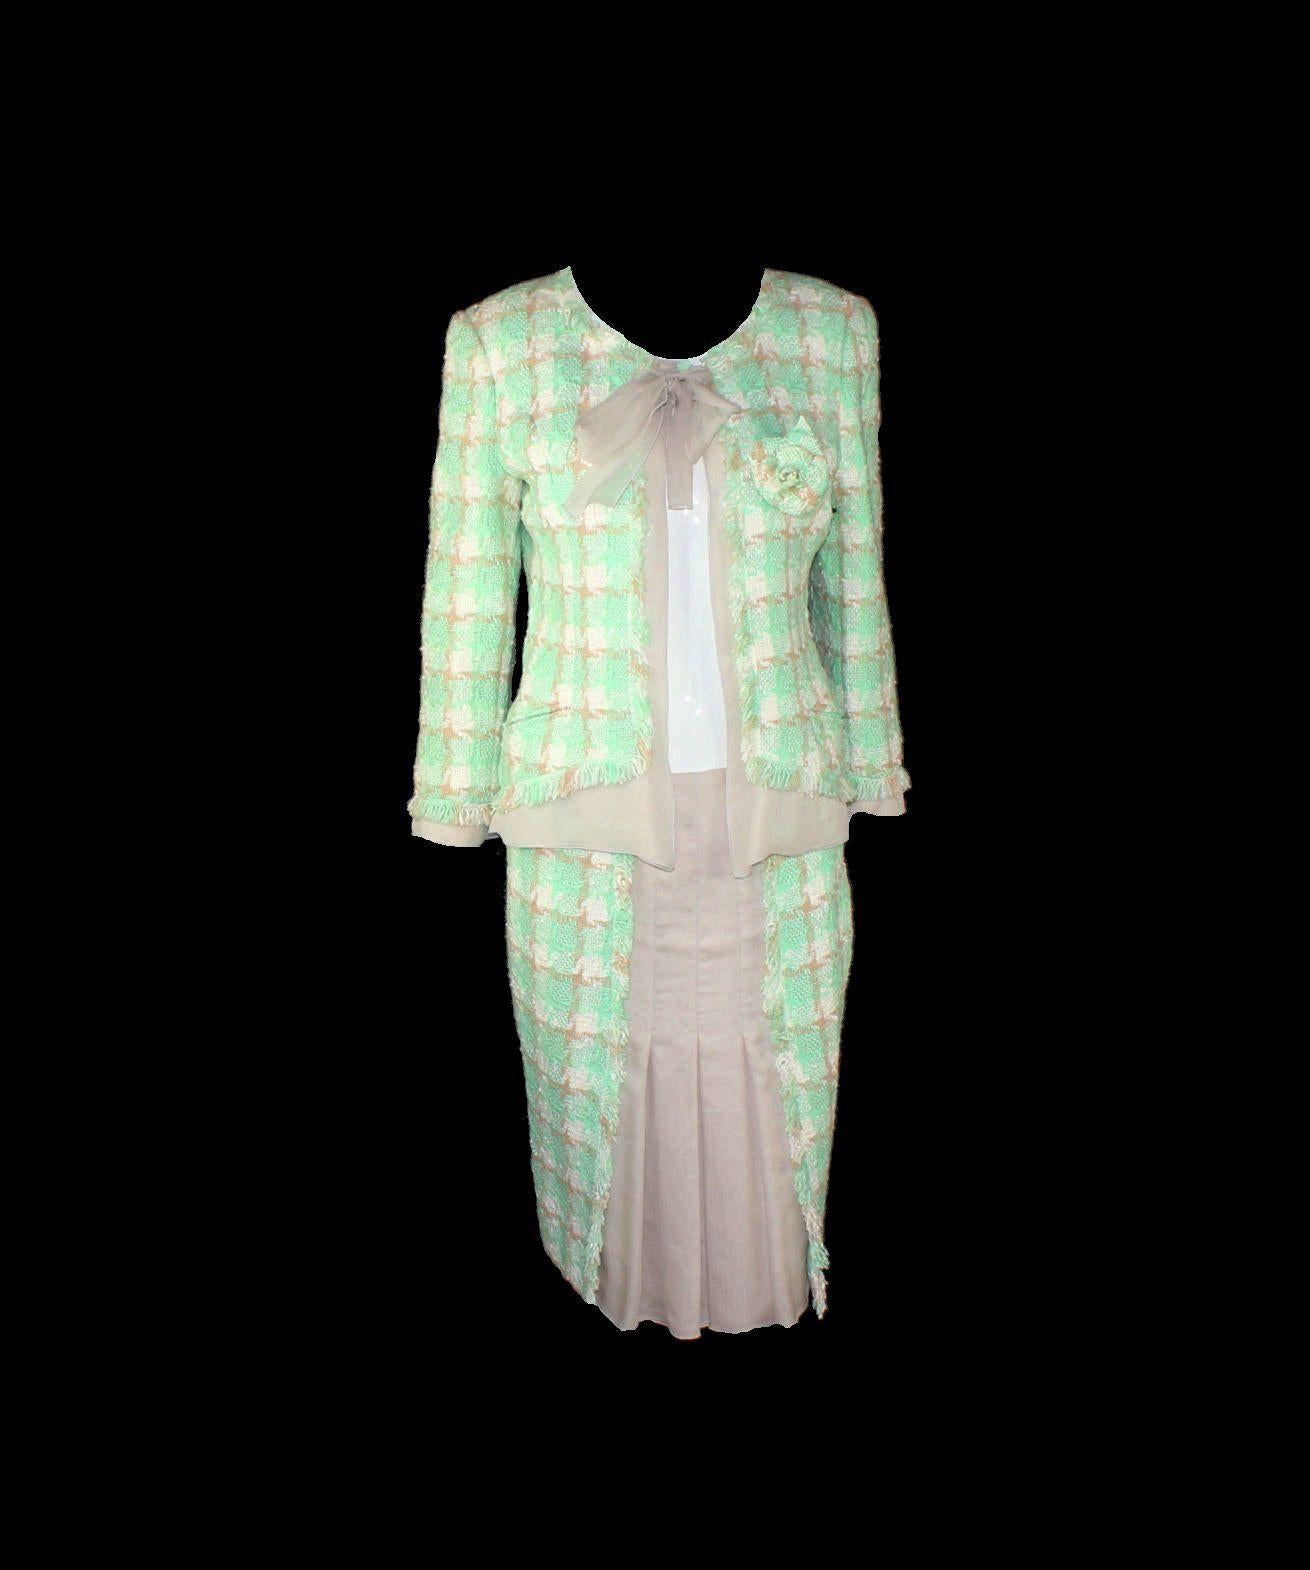 Beautiful Chanel Skirt Suit
Consisting of  jacket and skirt
One of the favourite pieces of Anna Wintour - she wore it several times styled differently
So versatile!
Jacket with two front pocket -still unopened
Silk trimming and bow tie